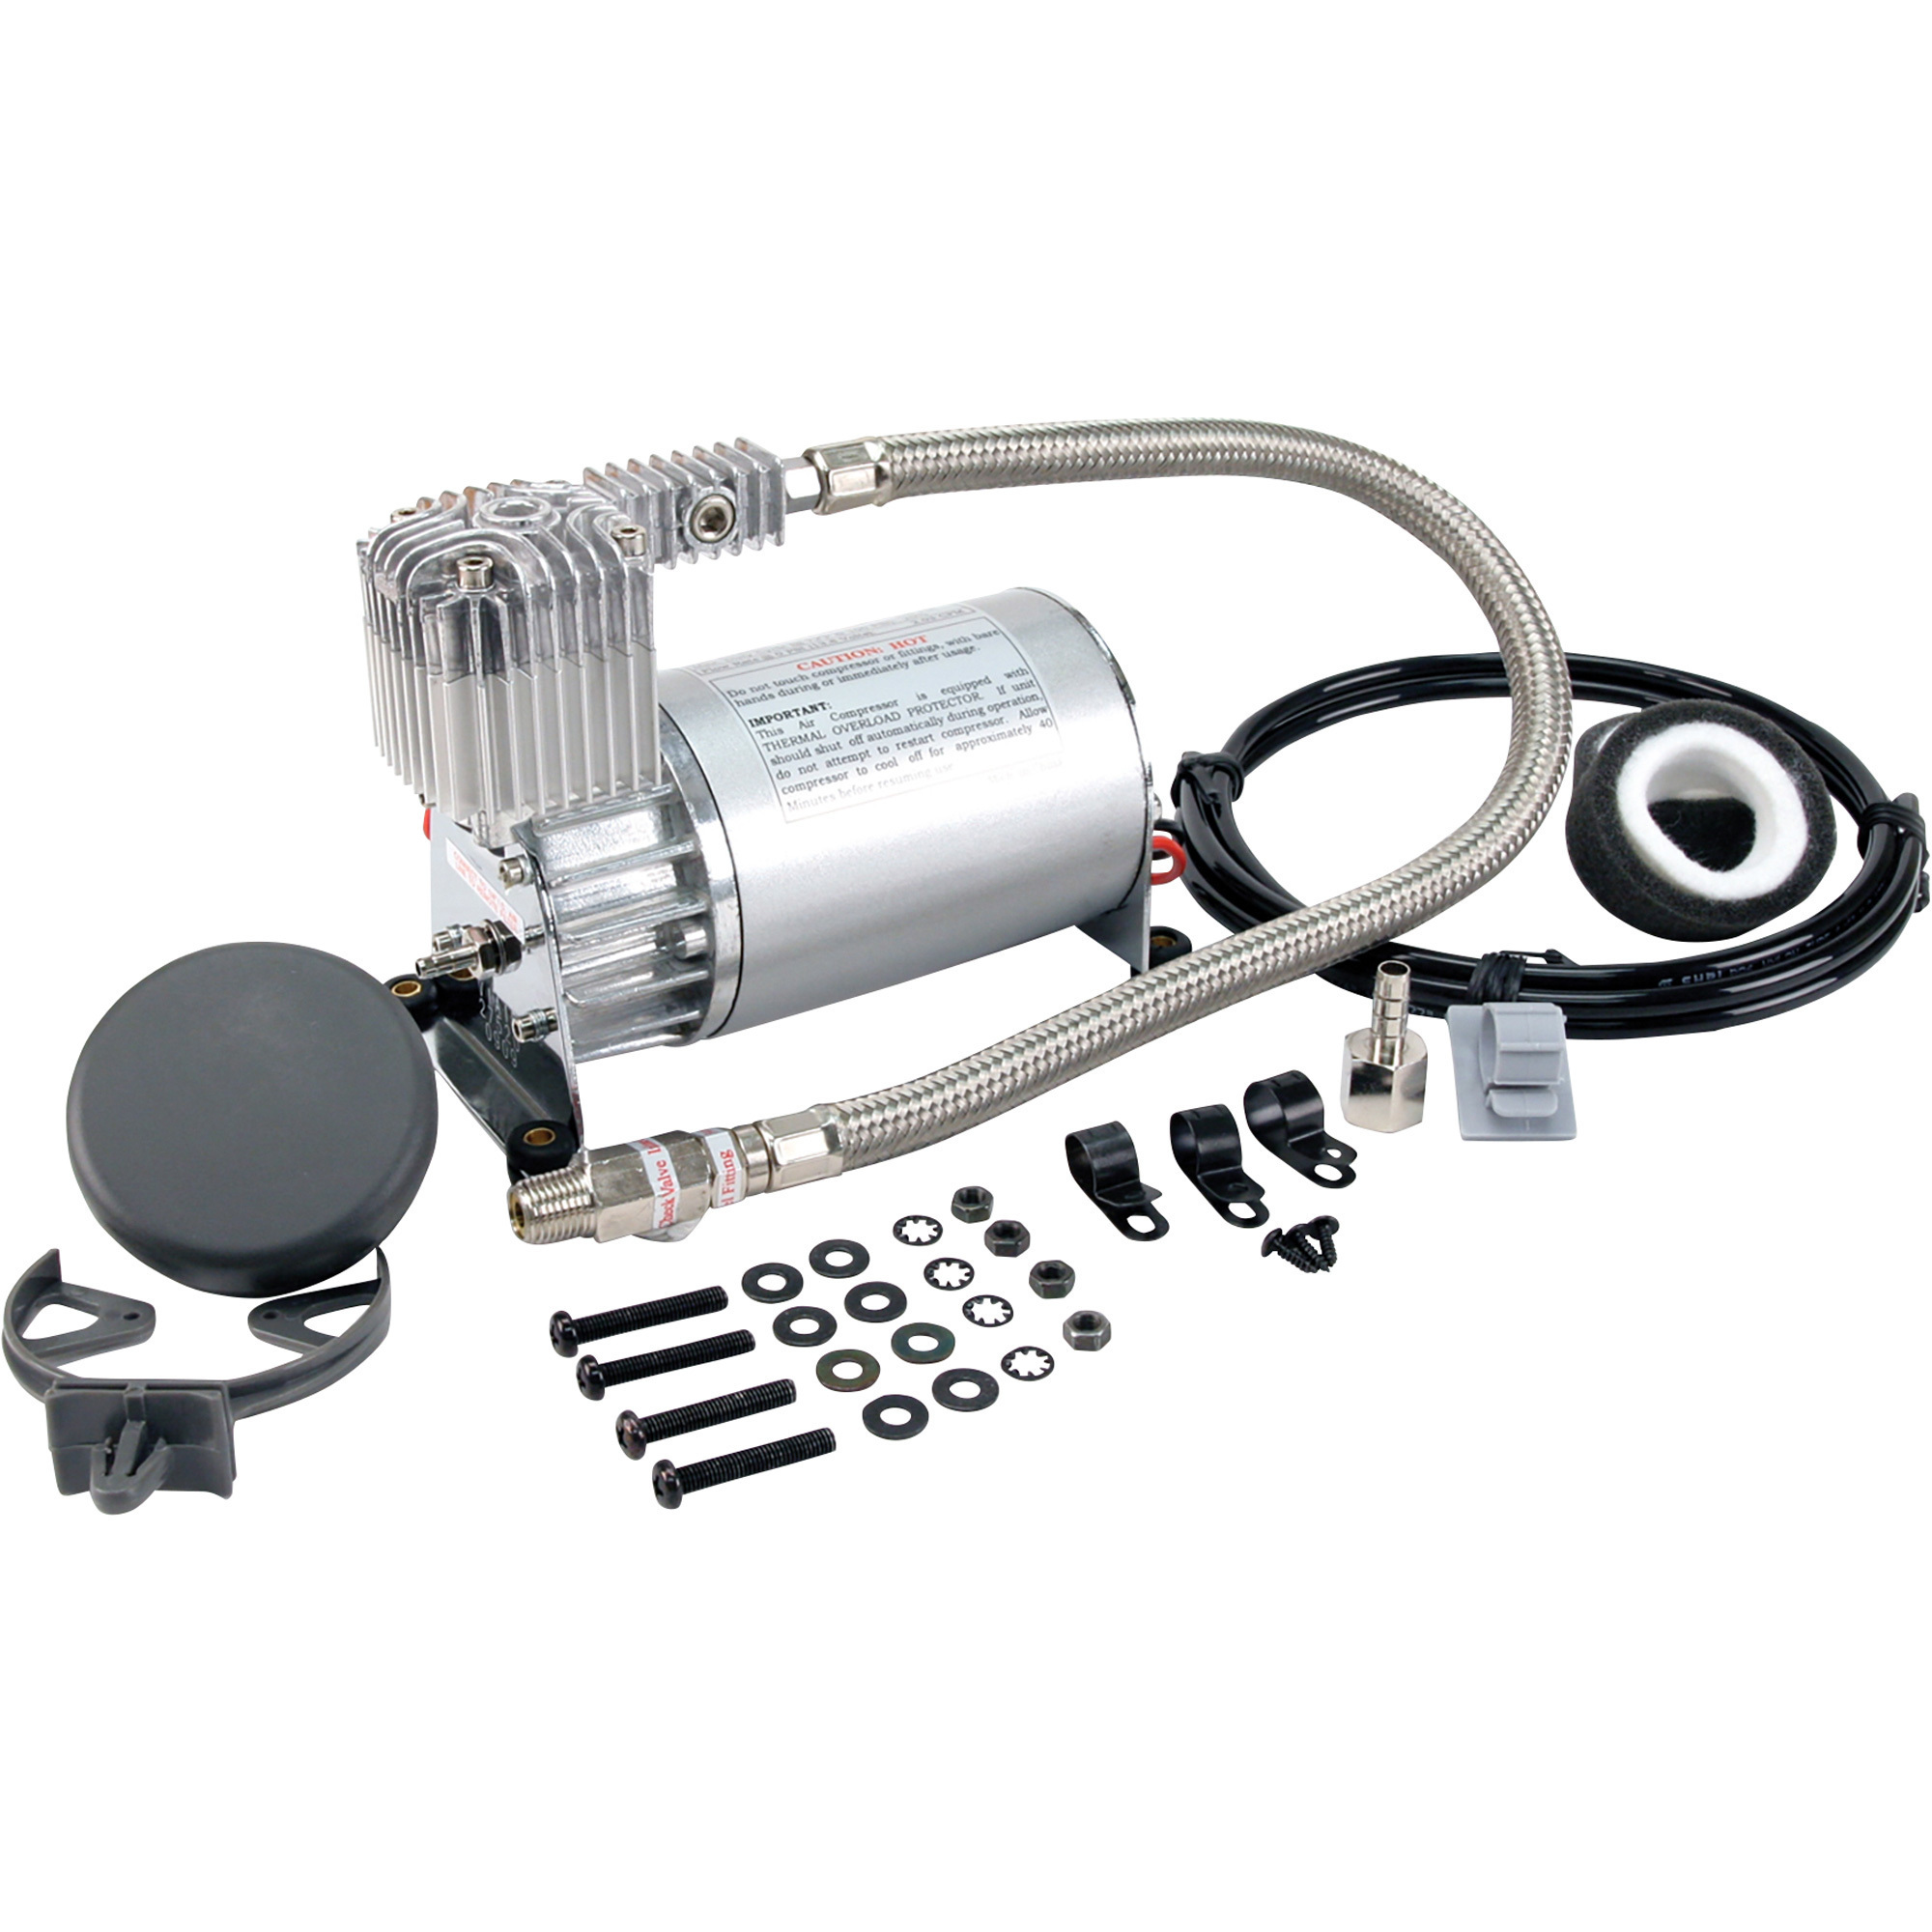 VIAIR 275C Compact Electric Air Compressor Kit, 2.5 Gallons, 150 PSI, Silver, Model 275c